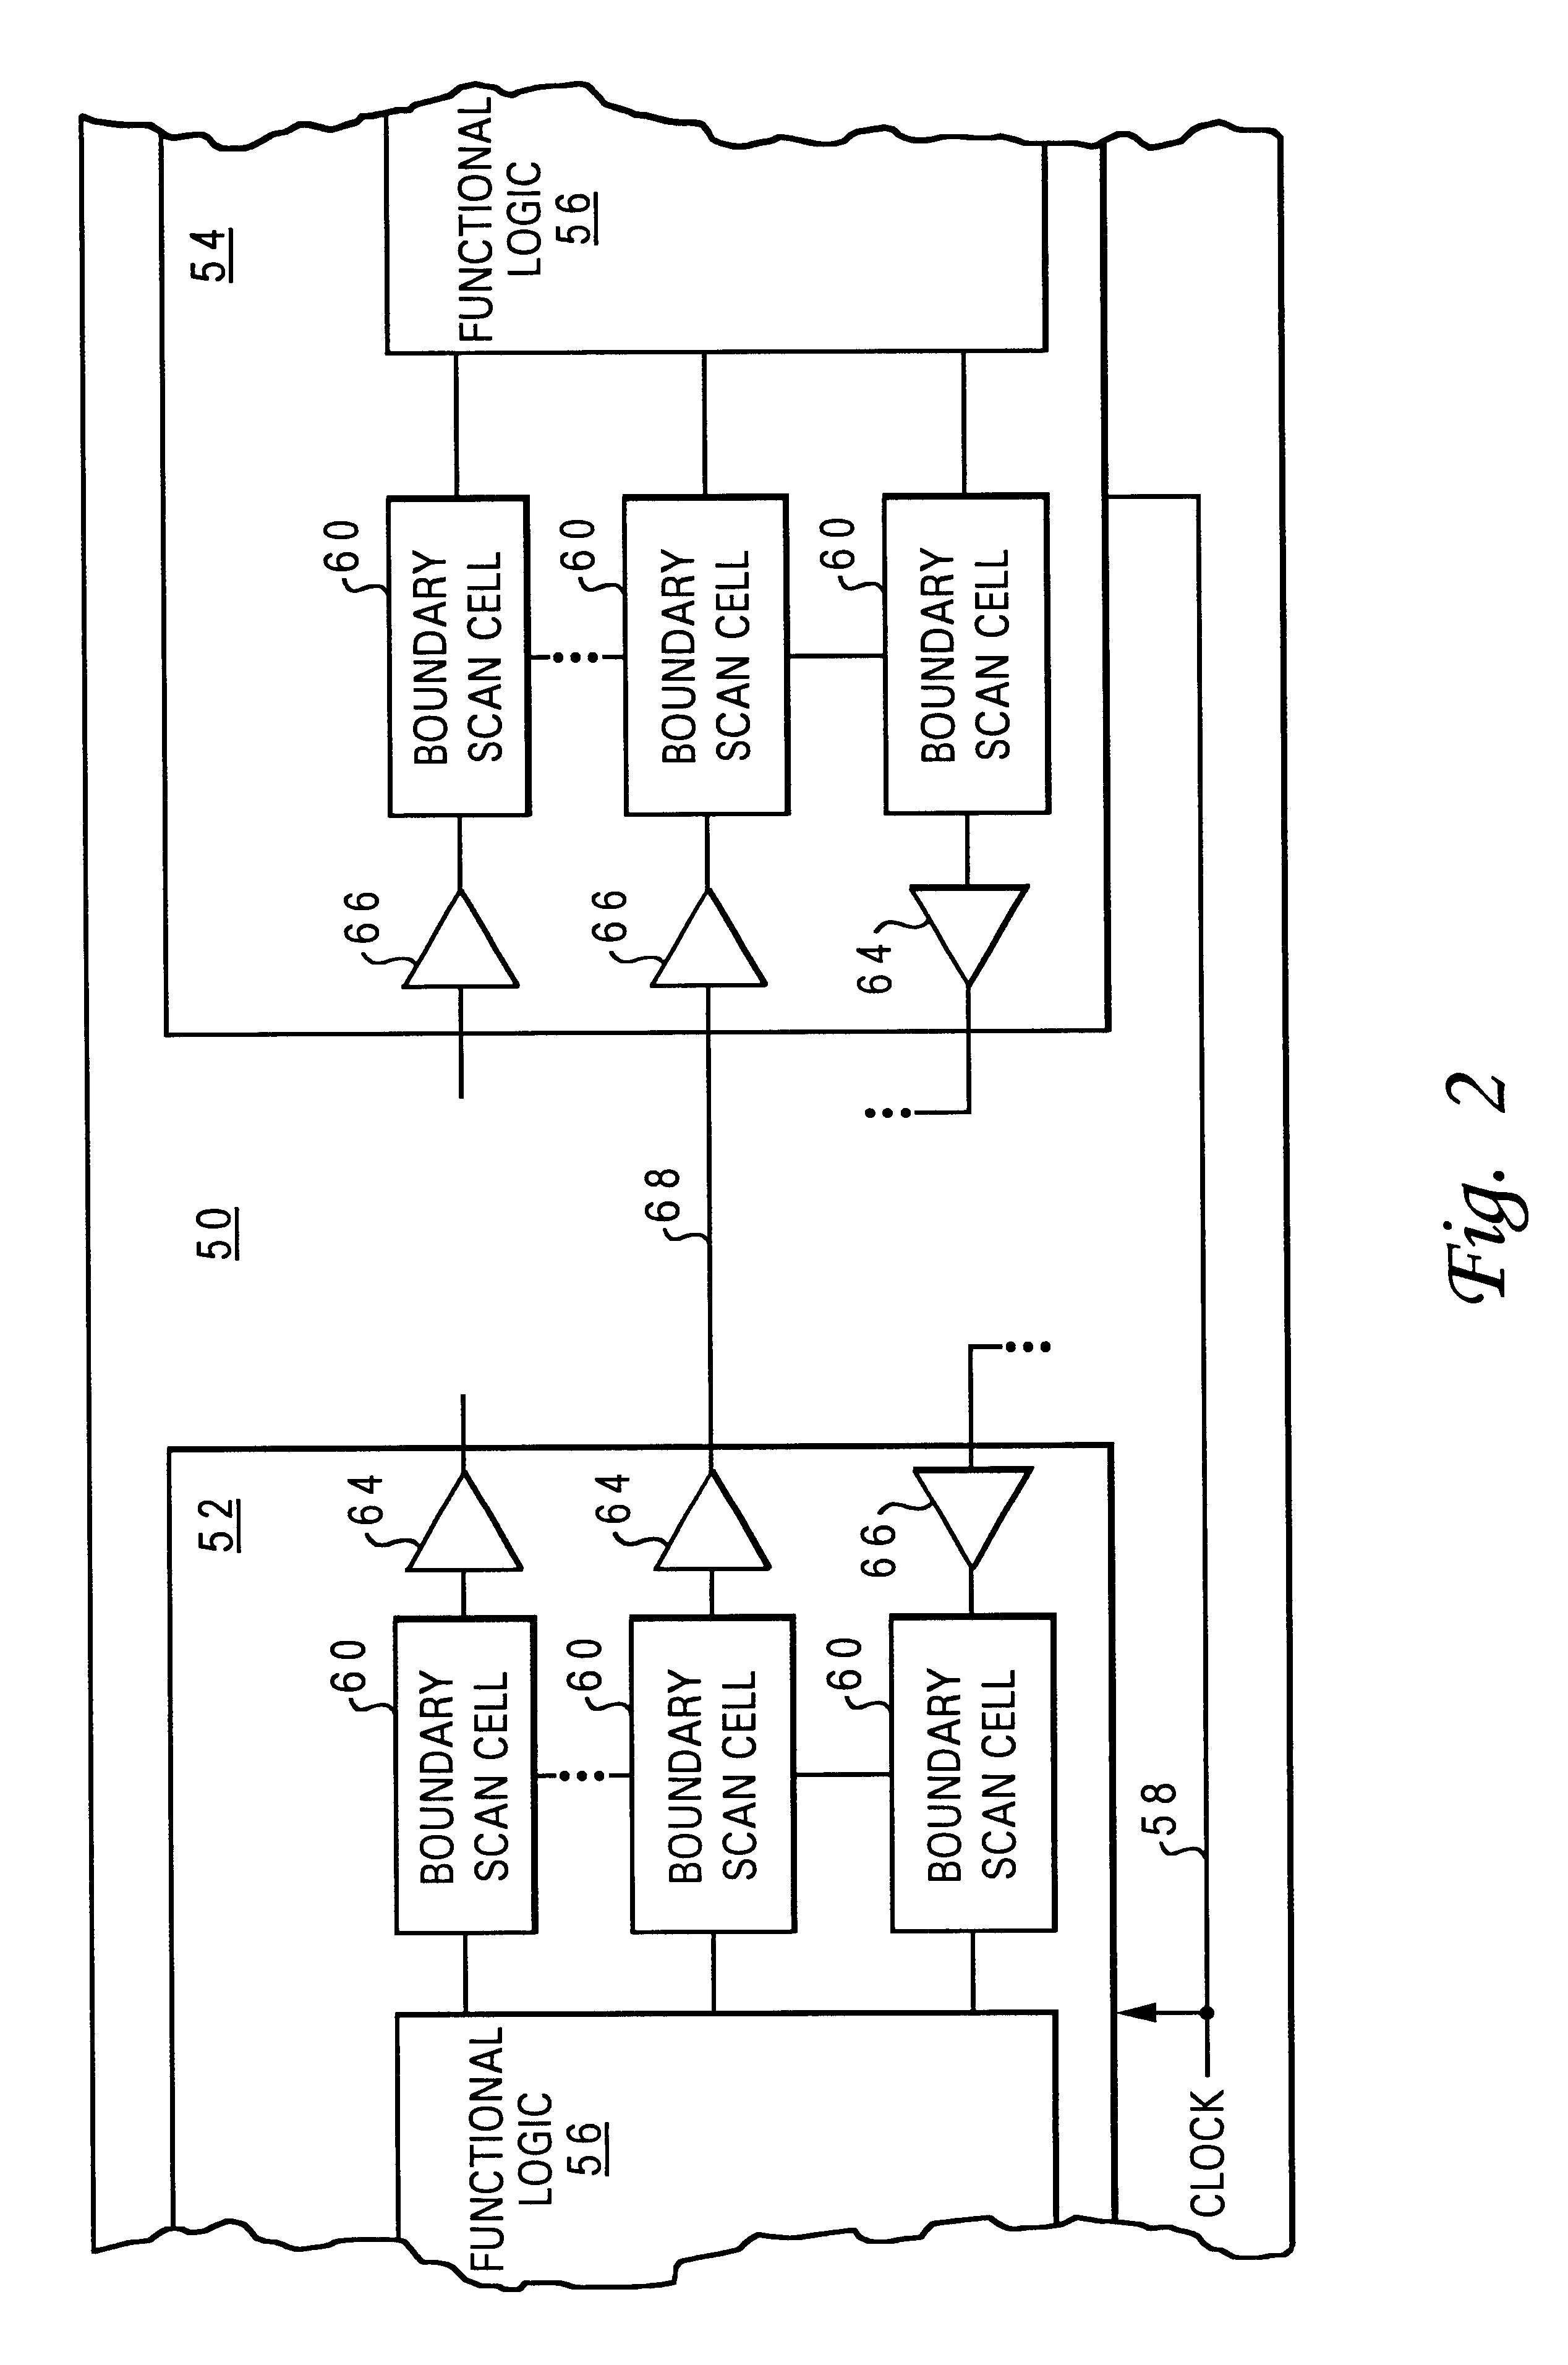 D flip-flop structure with flush path for high-speed boundary scan applications